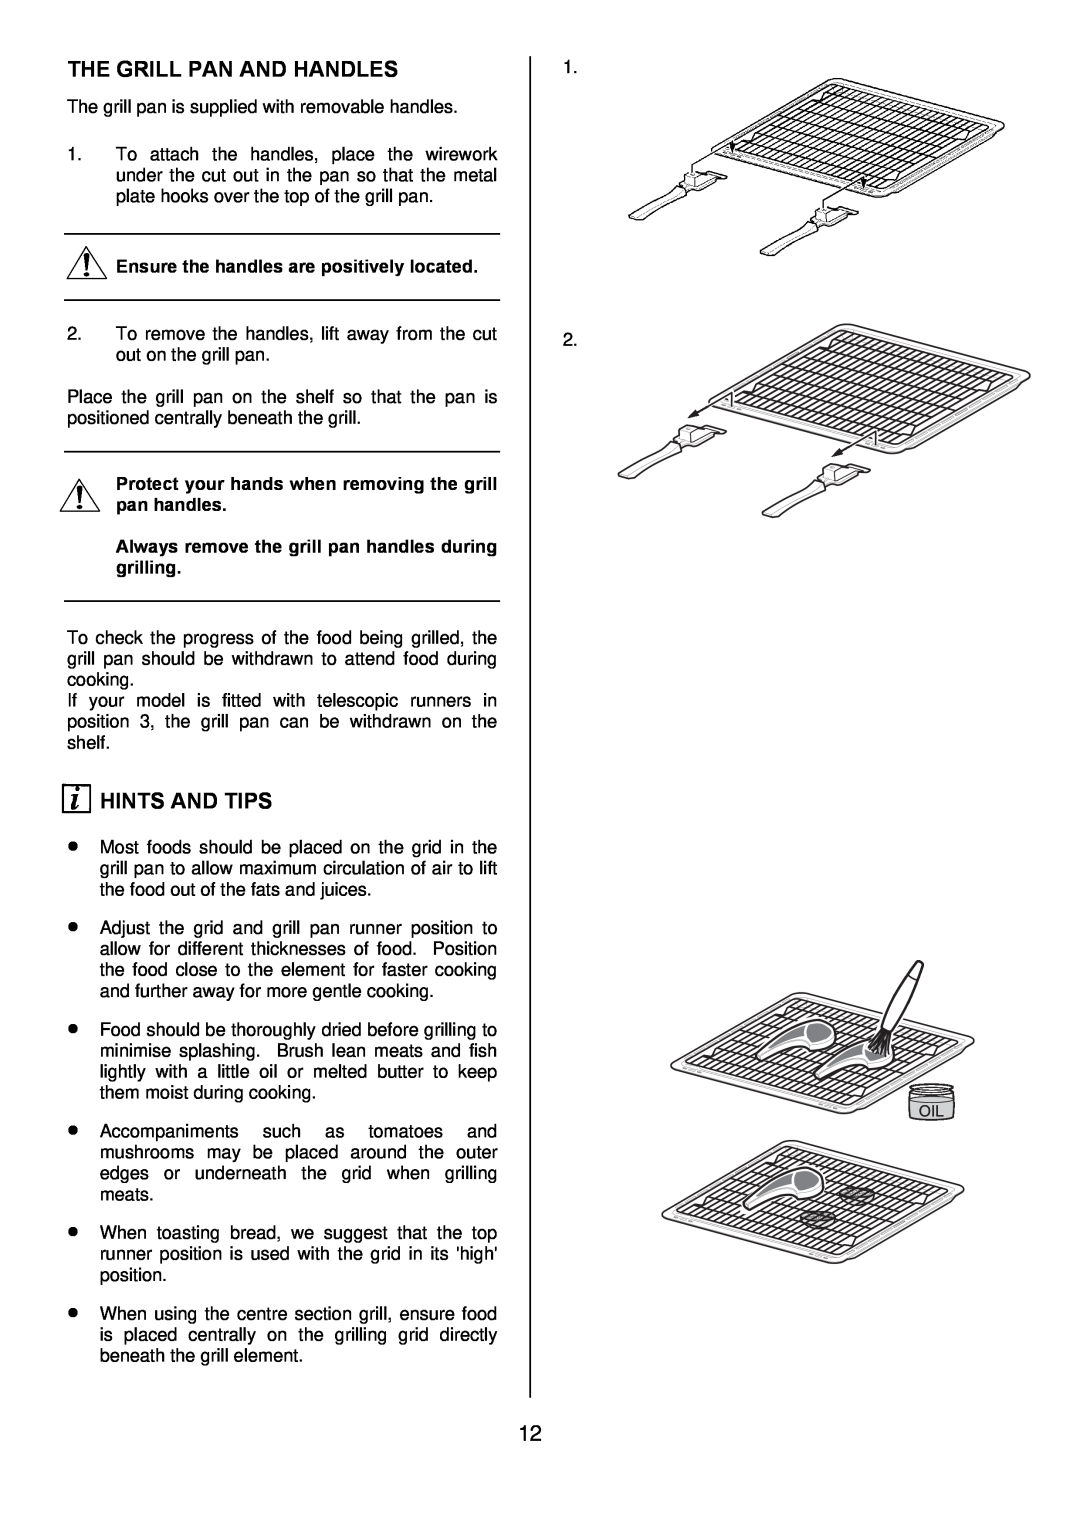 Electrolux D4101-5 manual The Grill Pan And Handles, Hints And Tips, Ensure the handles are positively located 